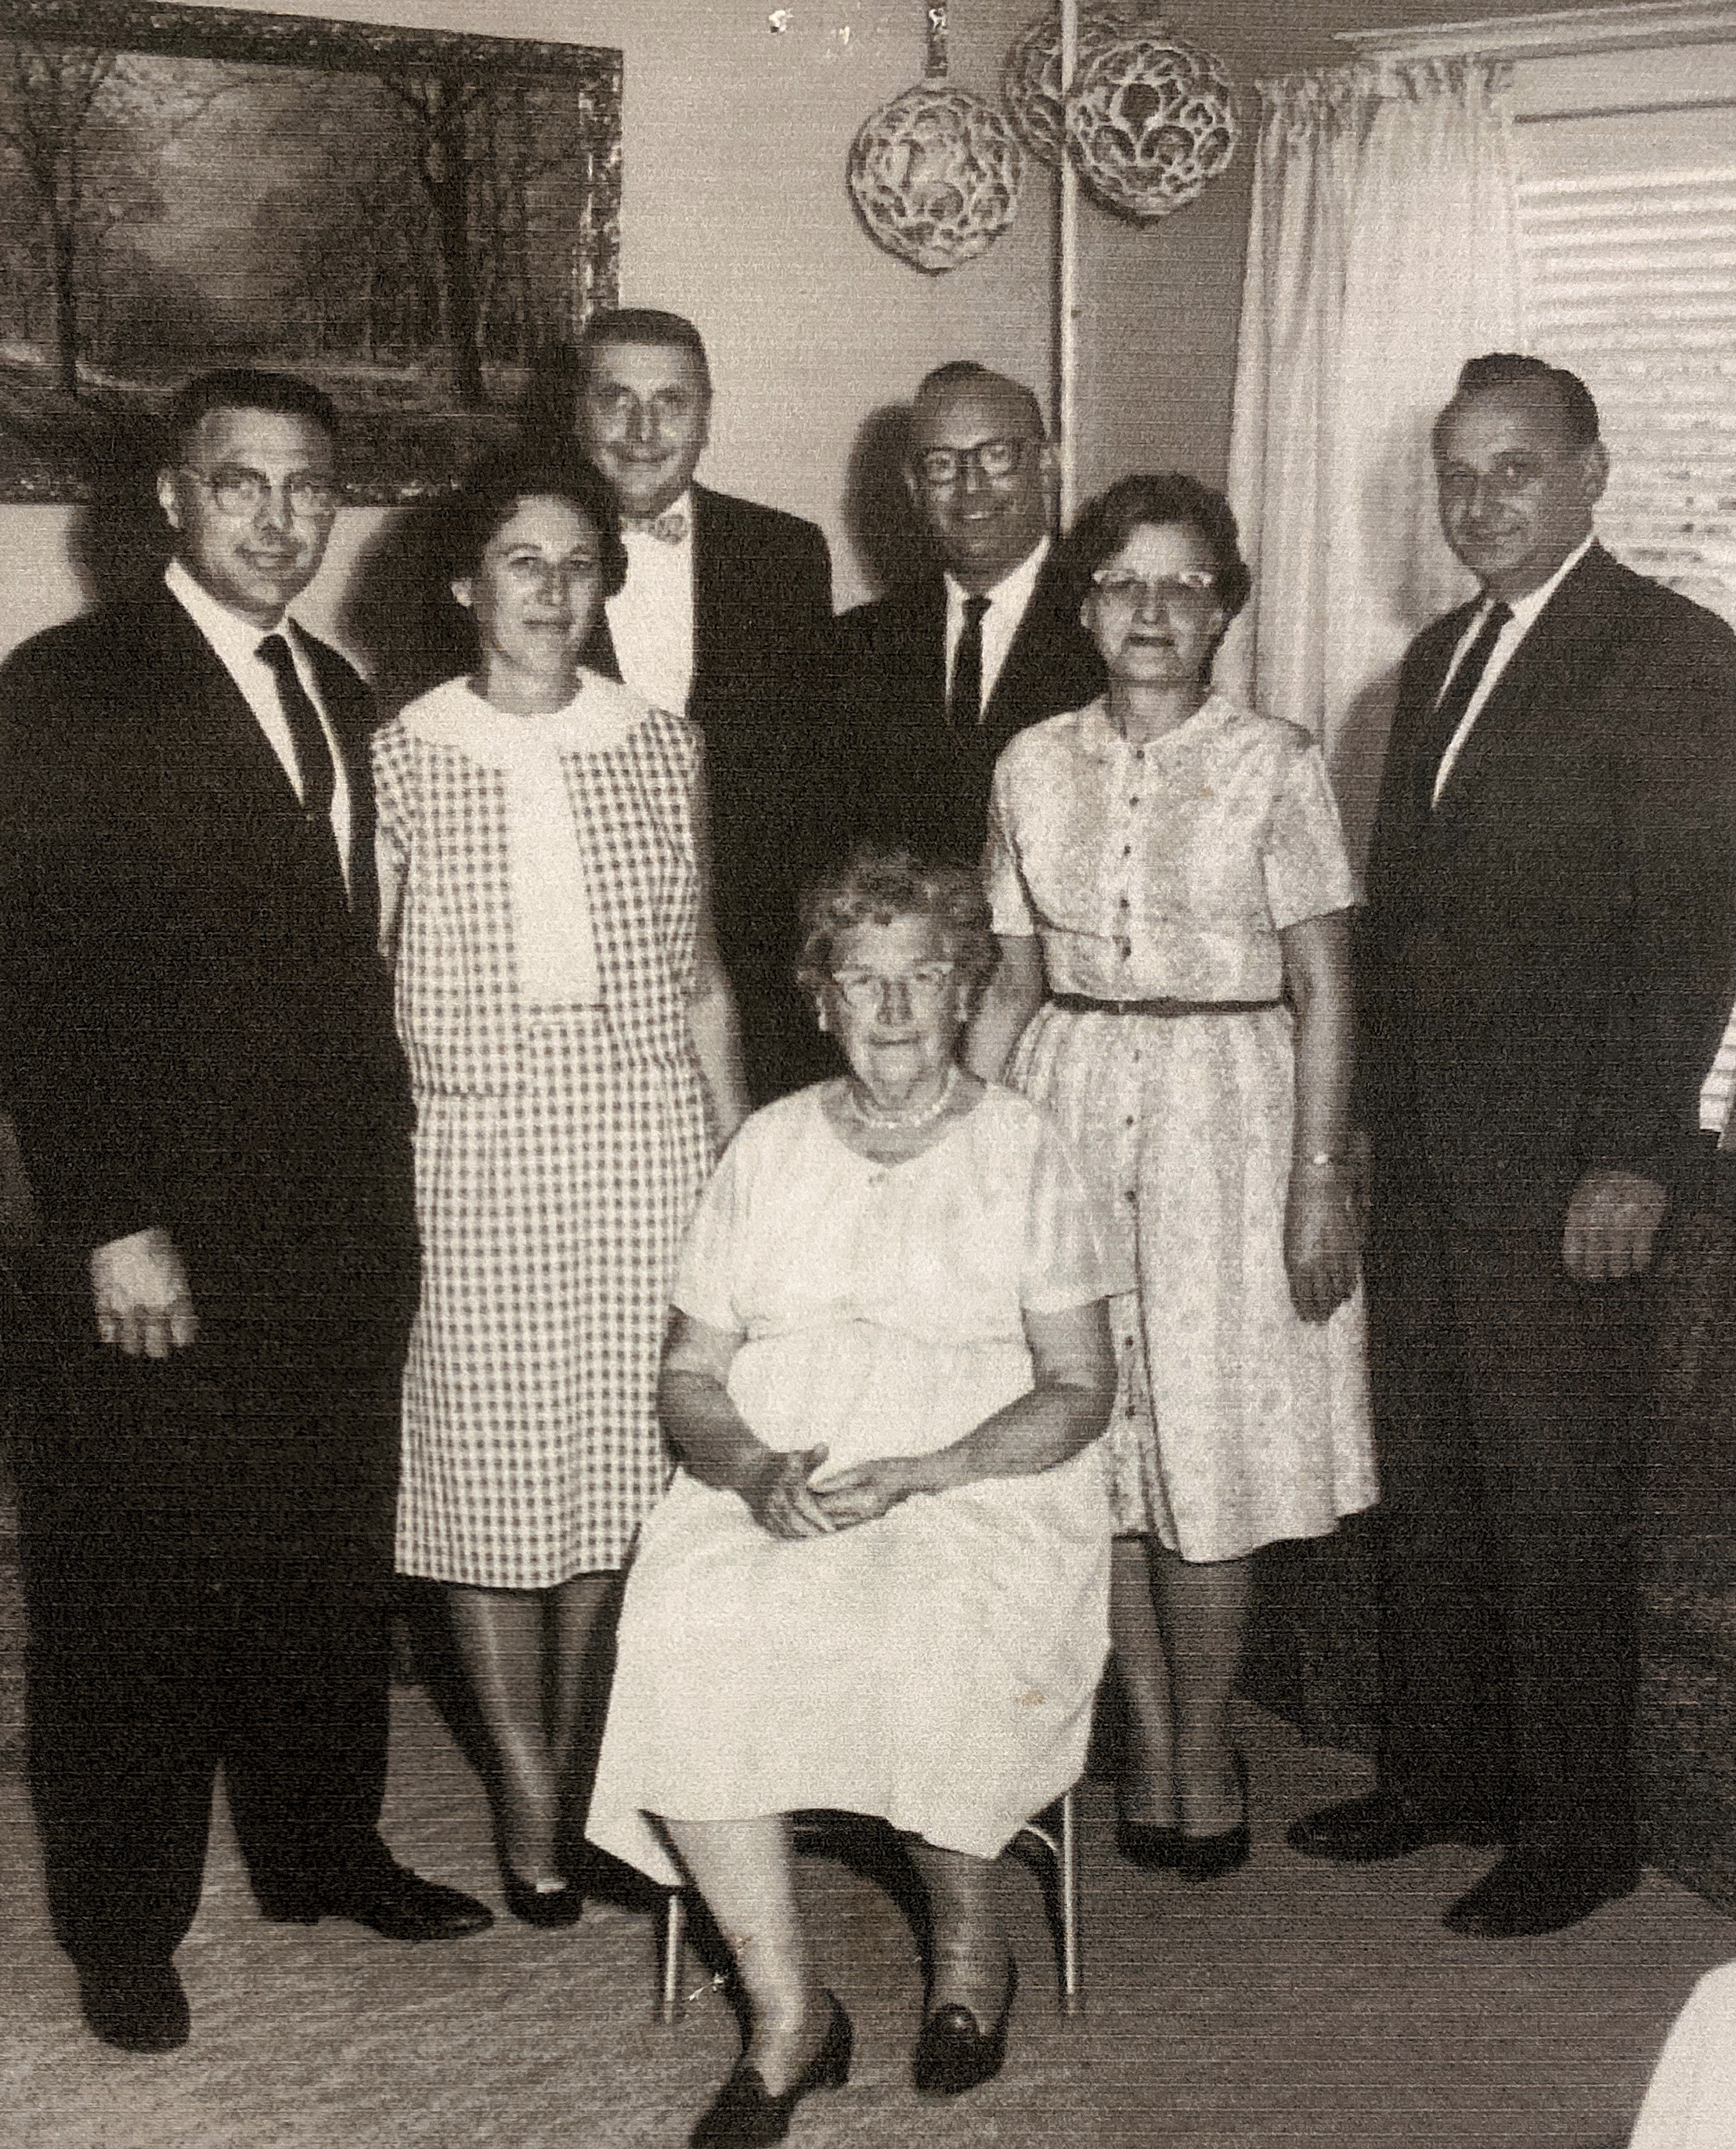 This photo was taken in 1965 for grandma’s 75th birthday.  Nelson, Marian Banks, Robert, Kenny, Betty Brown, Norman “Mike” with Emma Margaret ‘Neuman’ Blakley